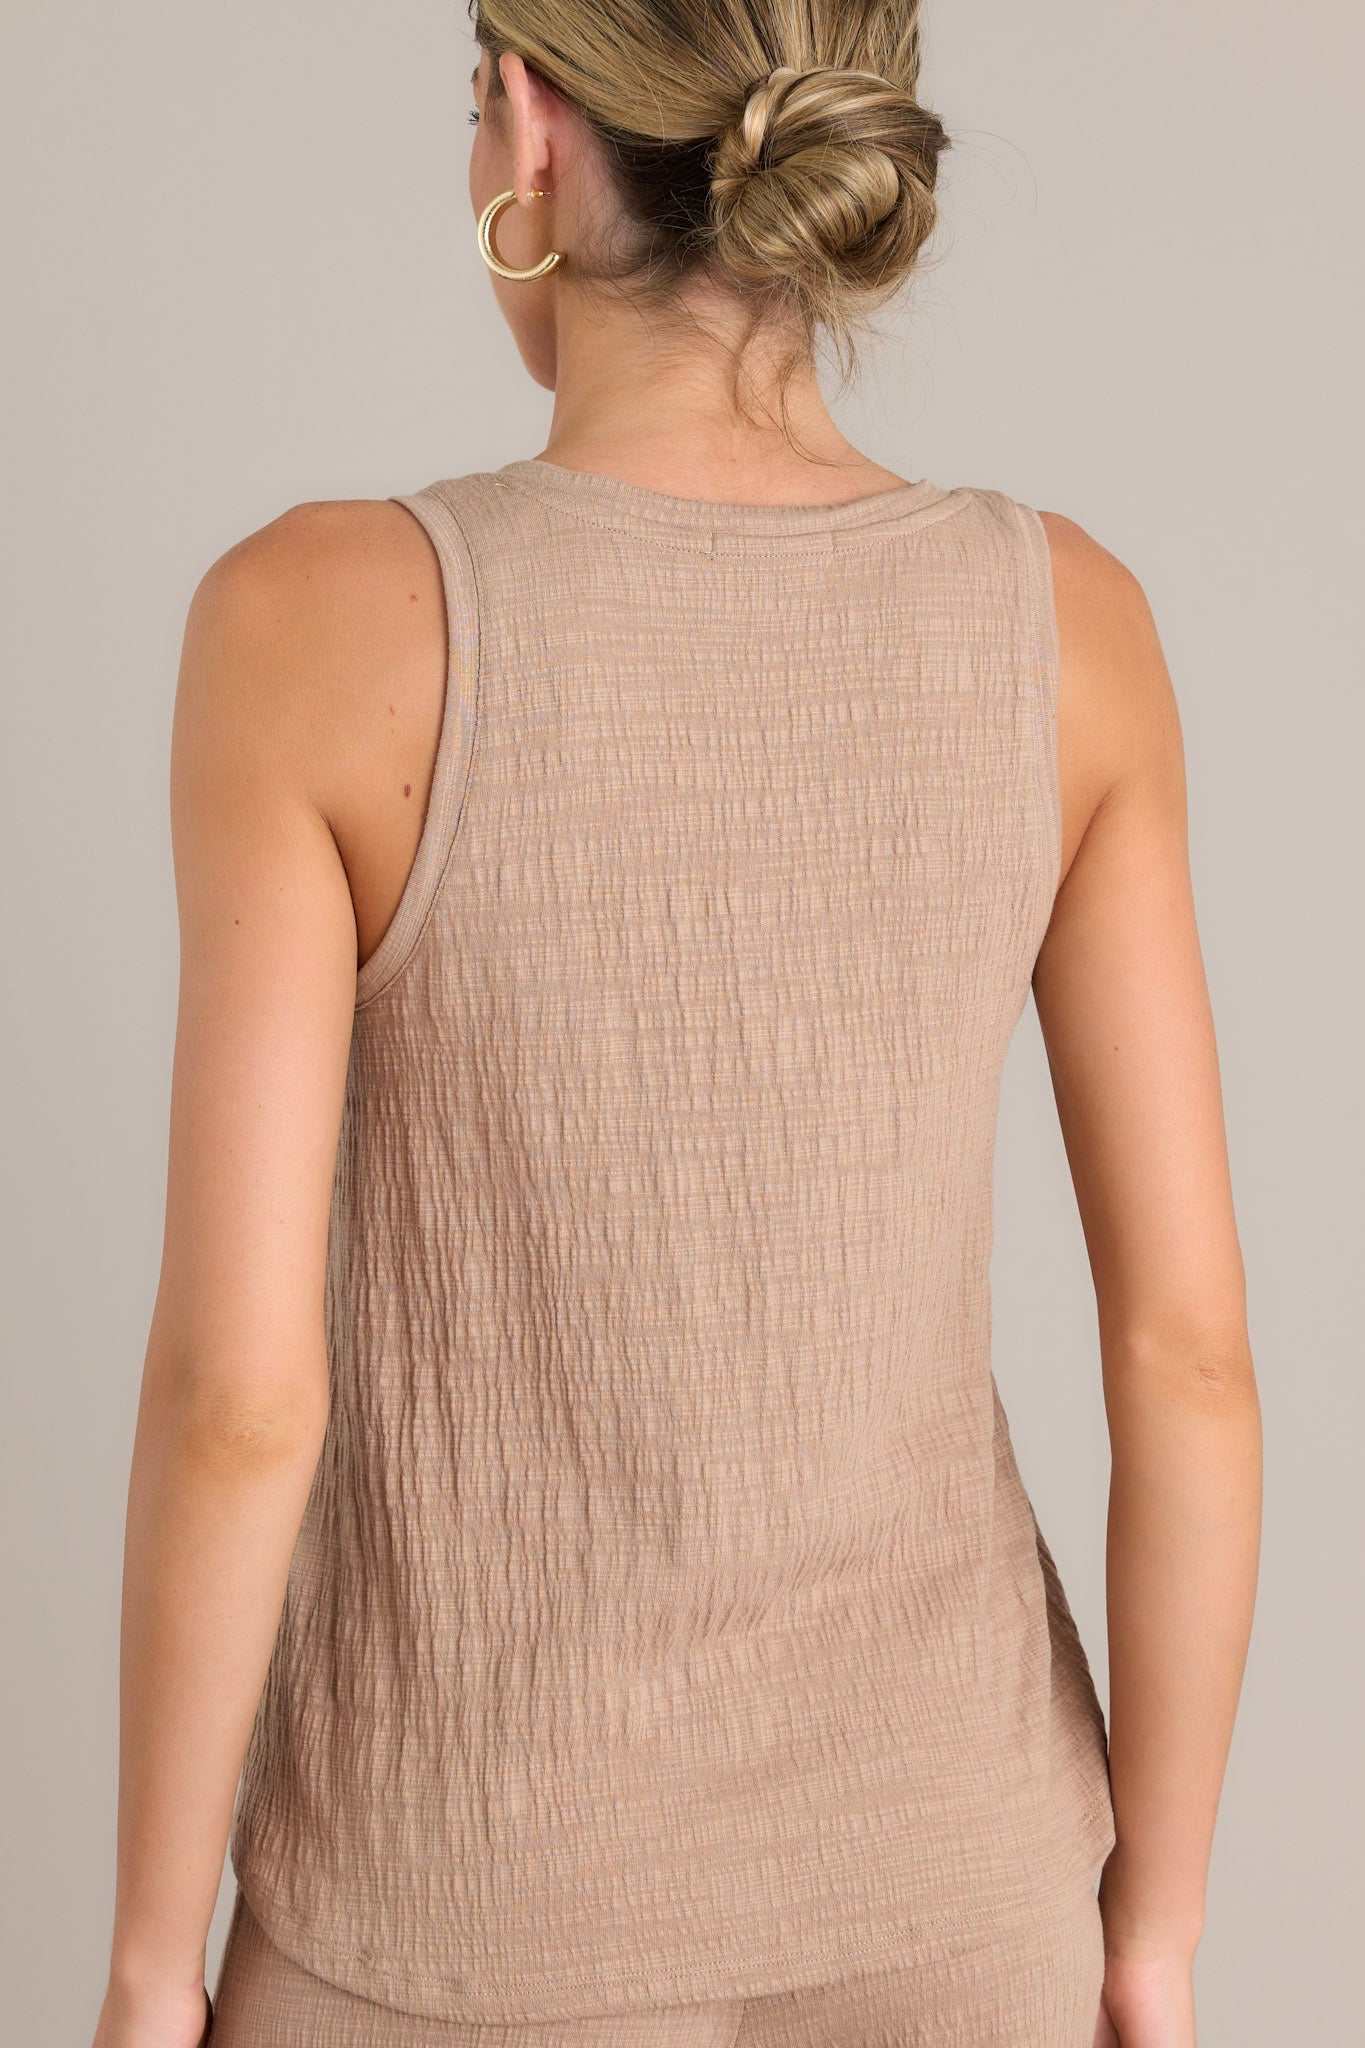 Back view of a tan tank top showcasing the sleeveless design and textured material.